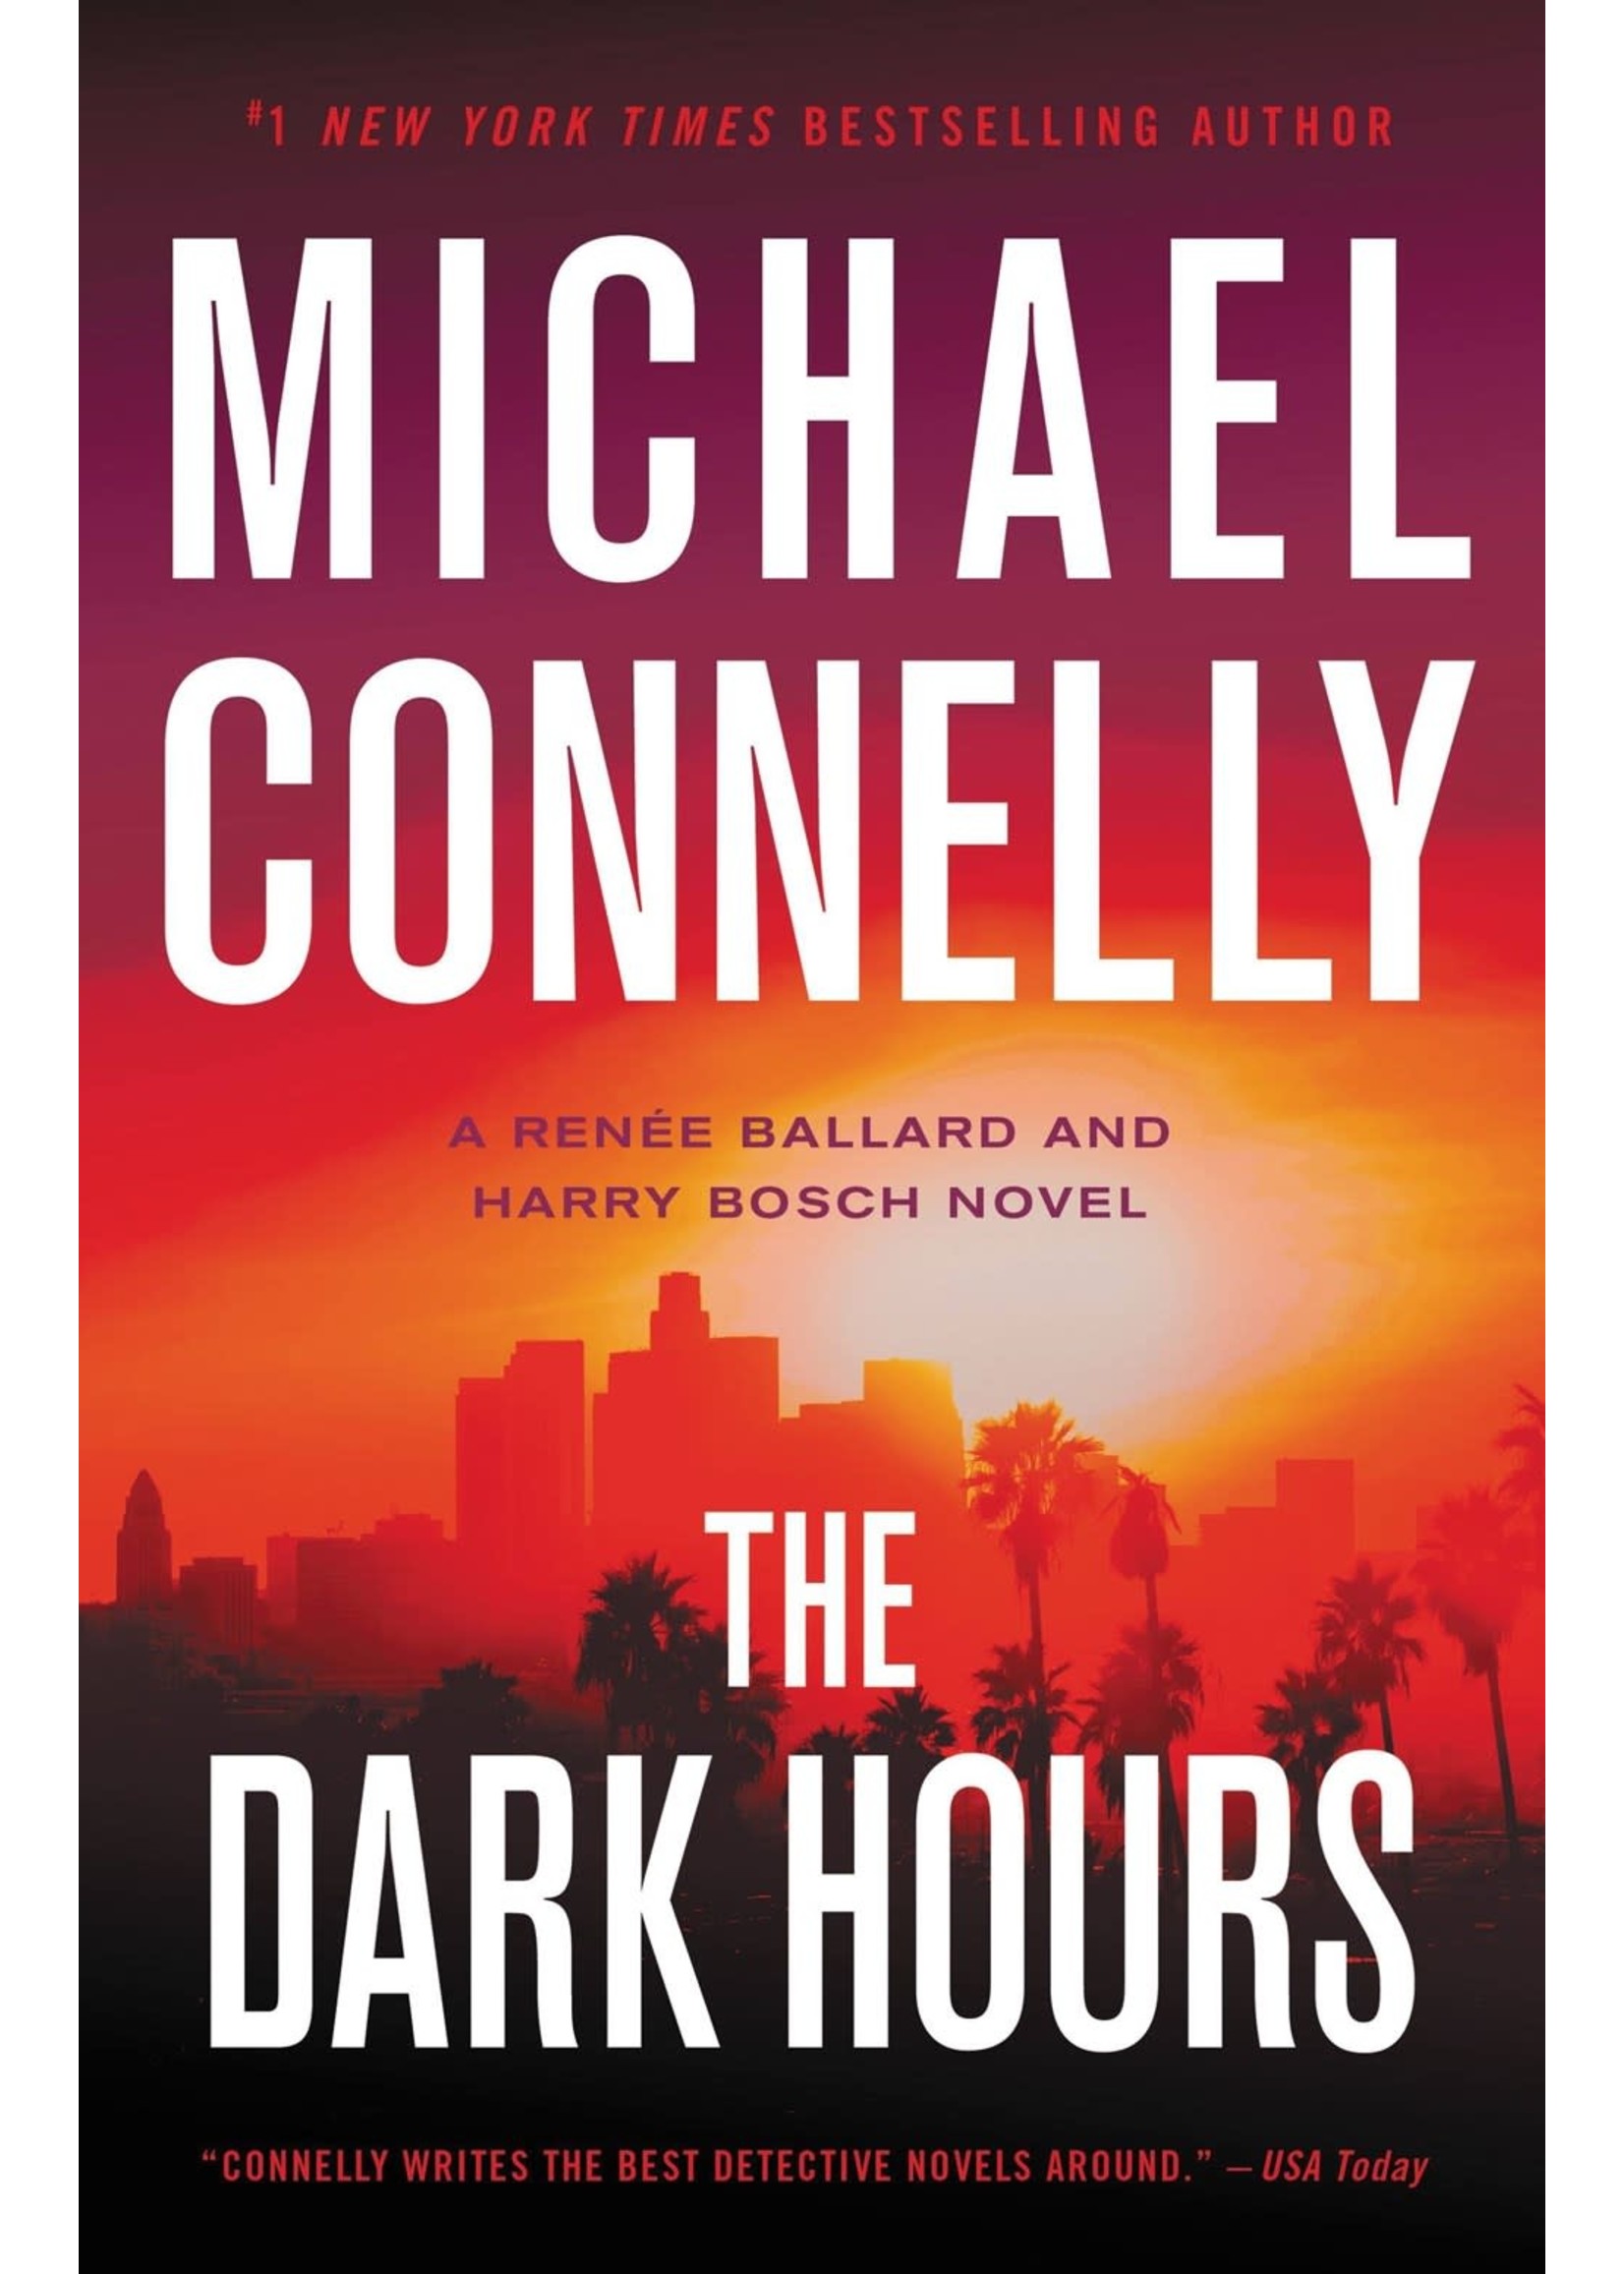 The Dark Hours (Harry Bosch #23) by Michael Connelly